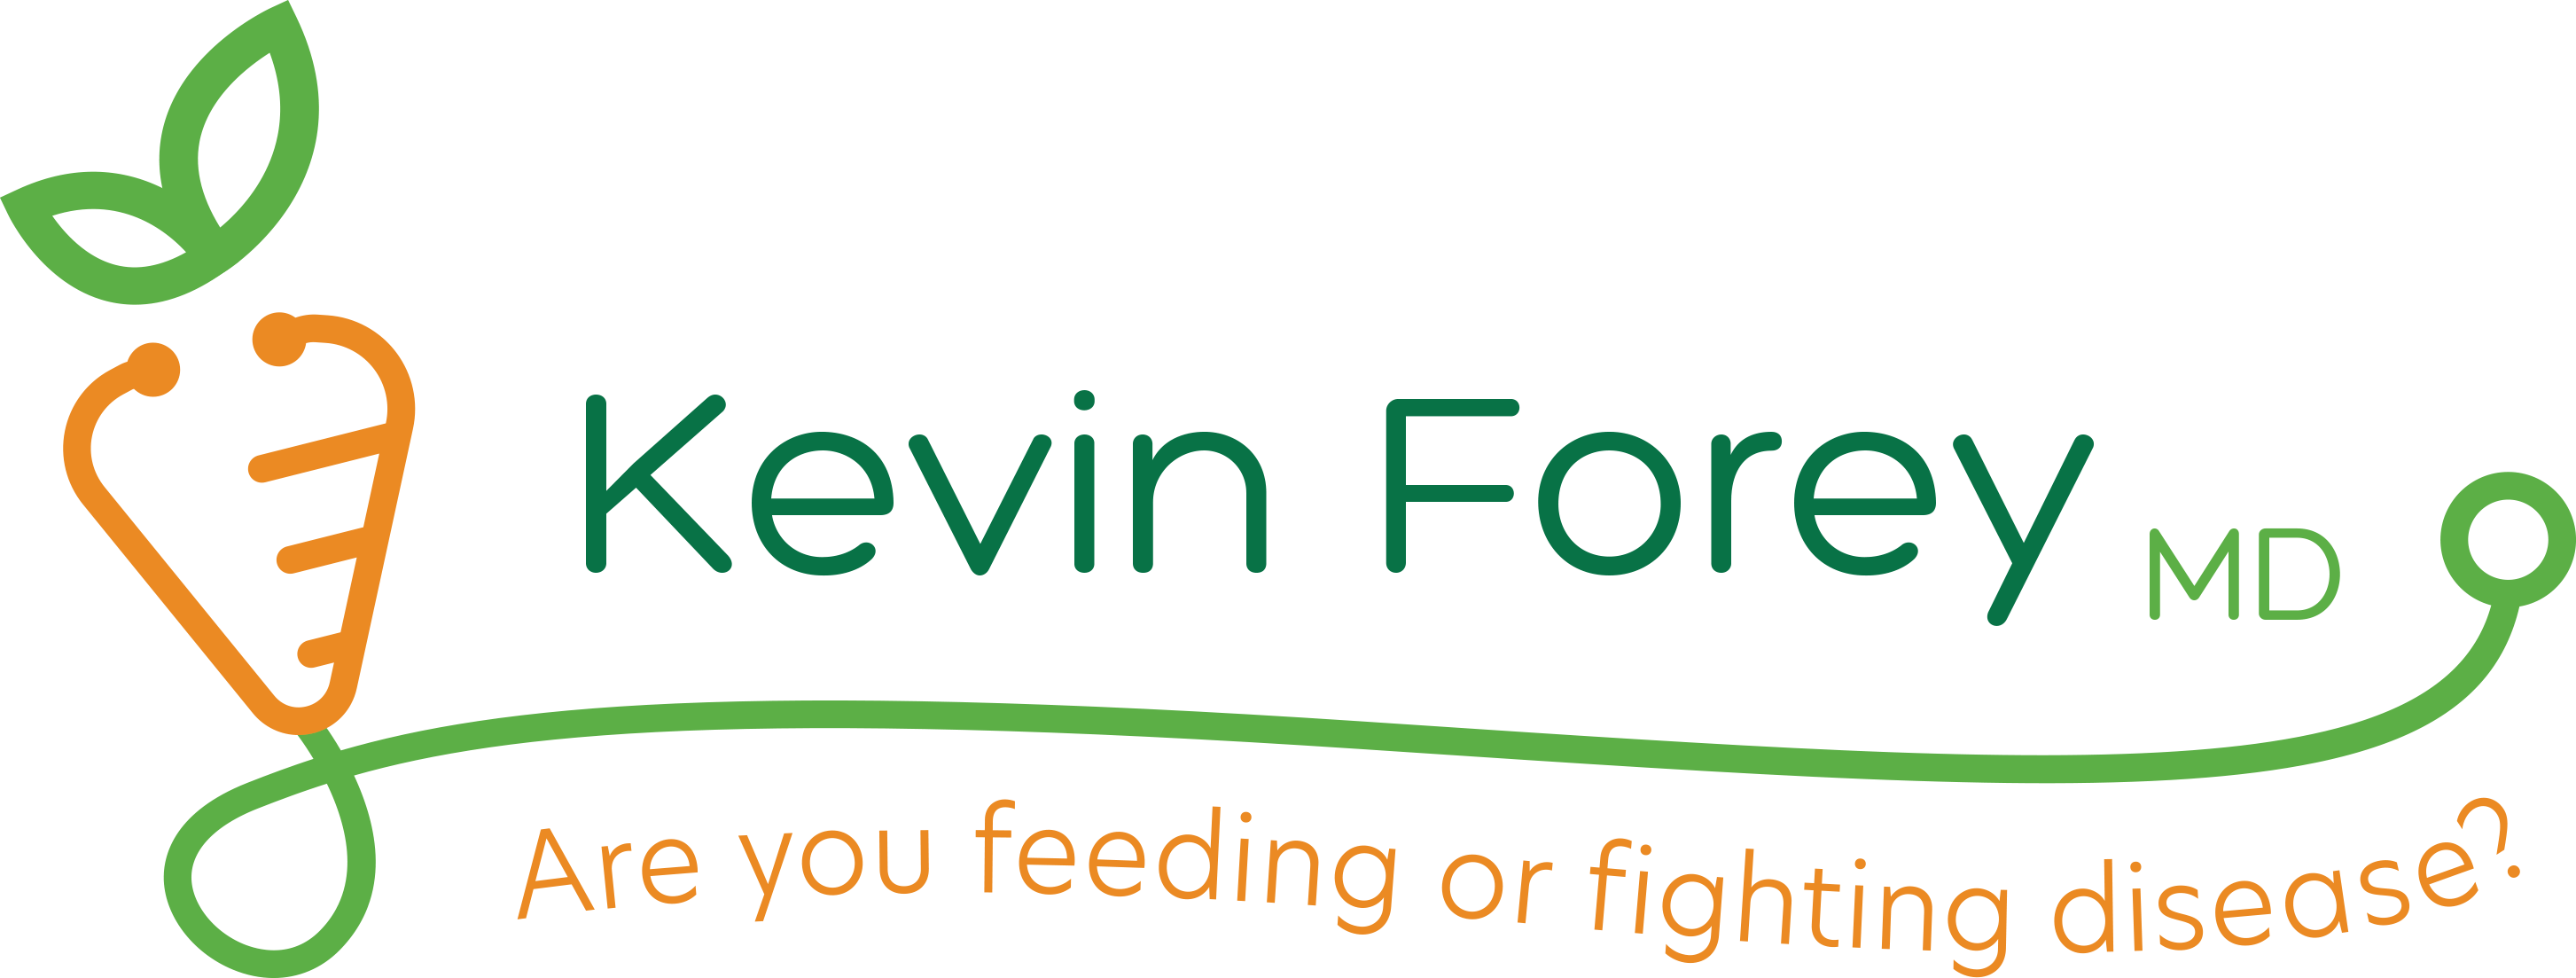 Kevin Forey MD